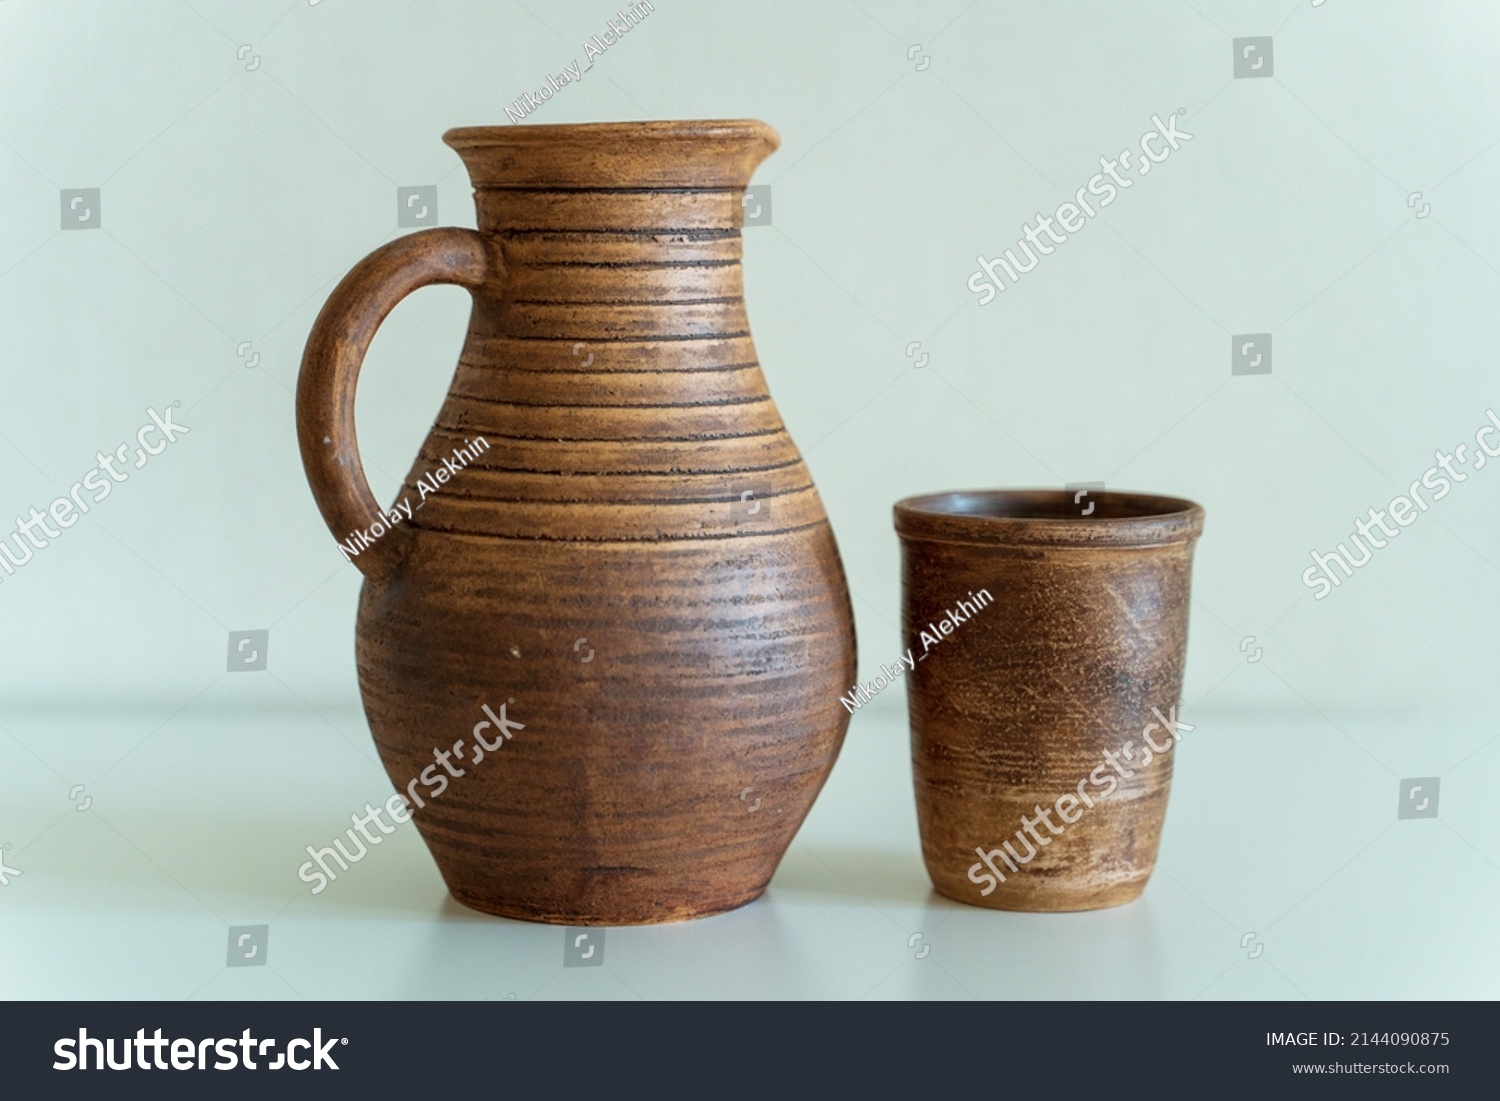 Stock Photo  Ceramics A Ceramic Product Made With Your Own Hands Made On A Potter S Wheel A Jug A Mug 2144090875 